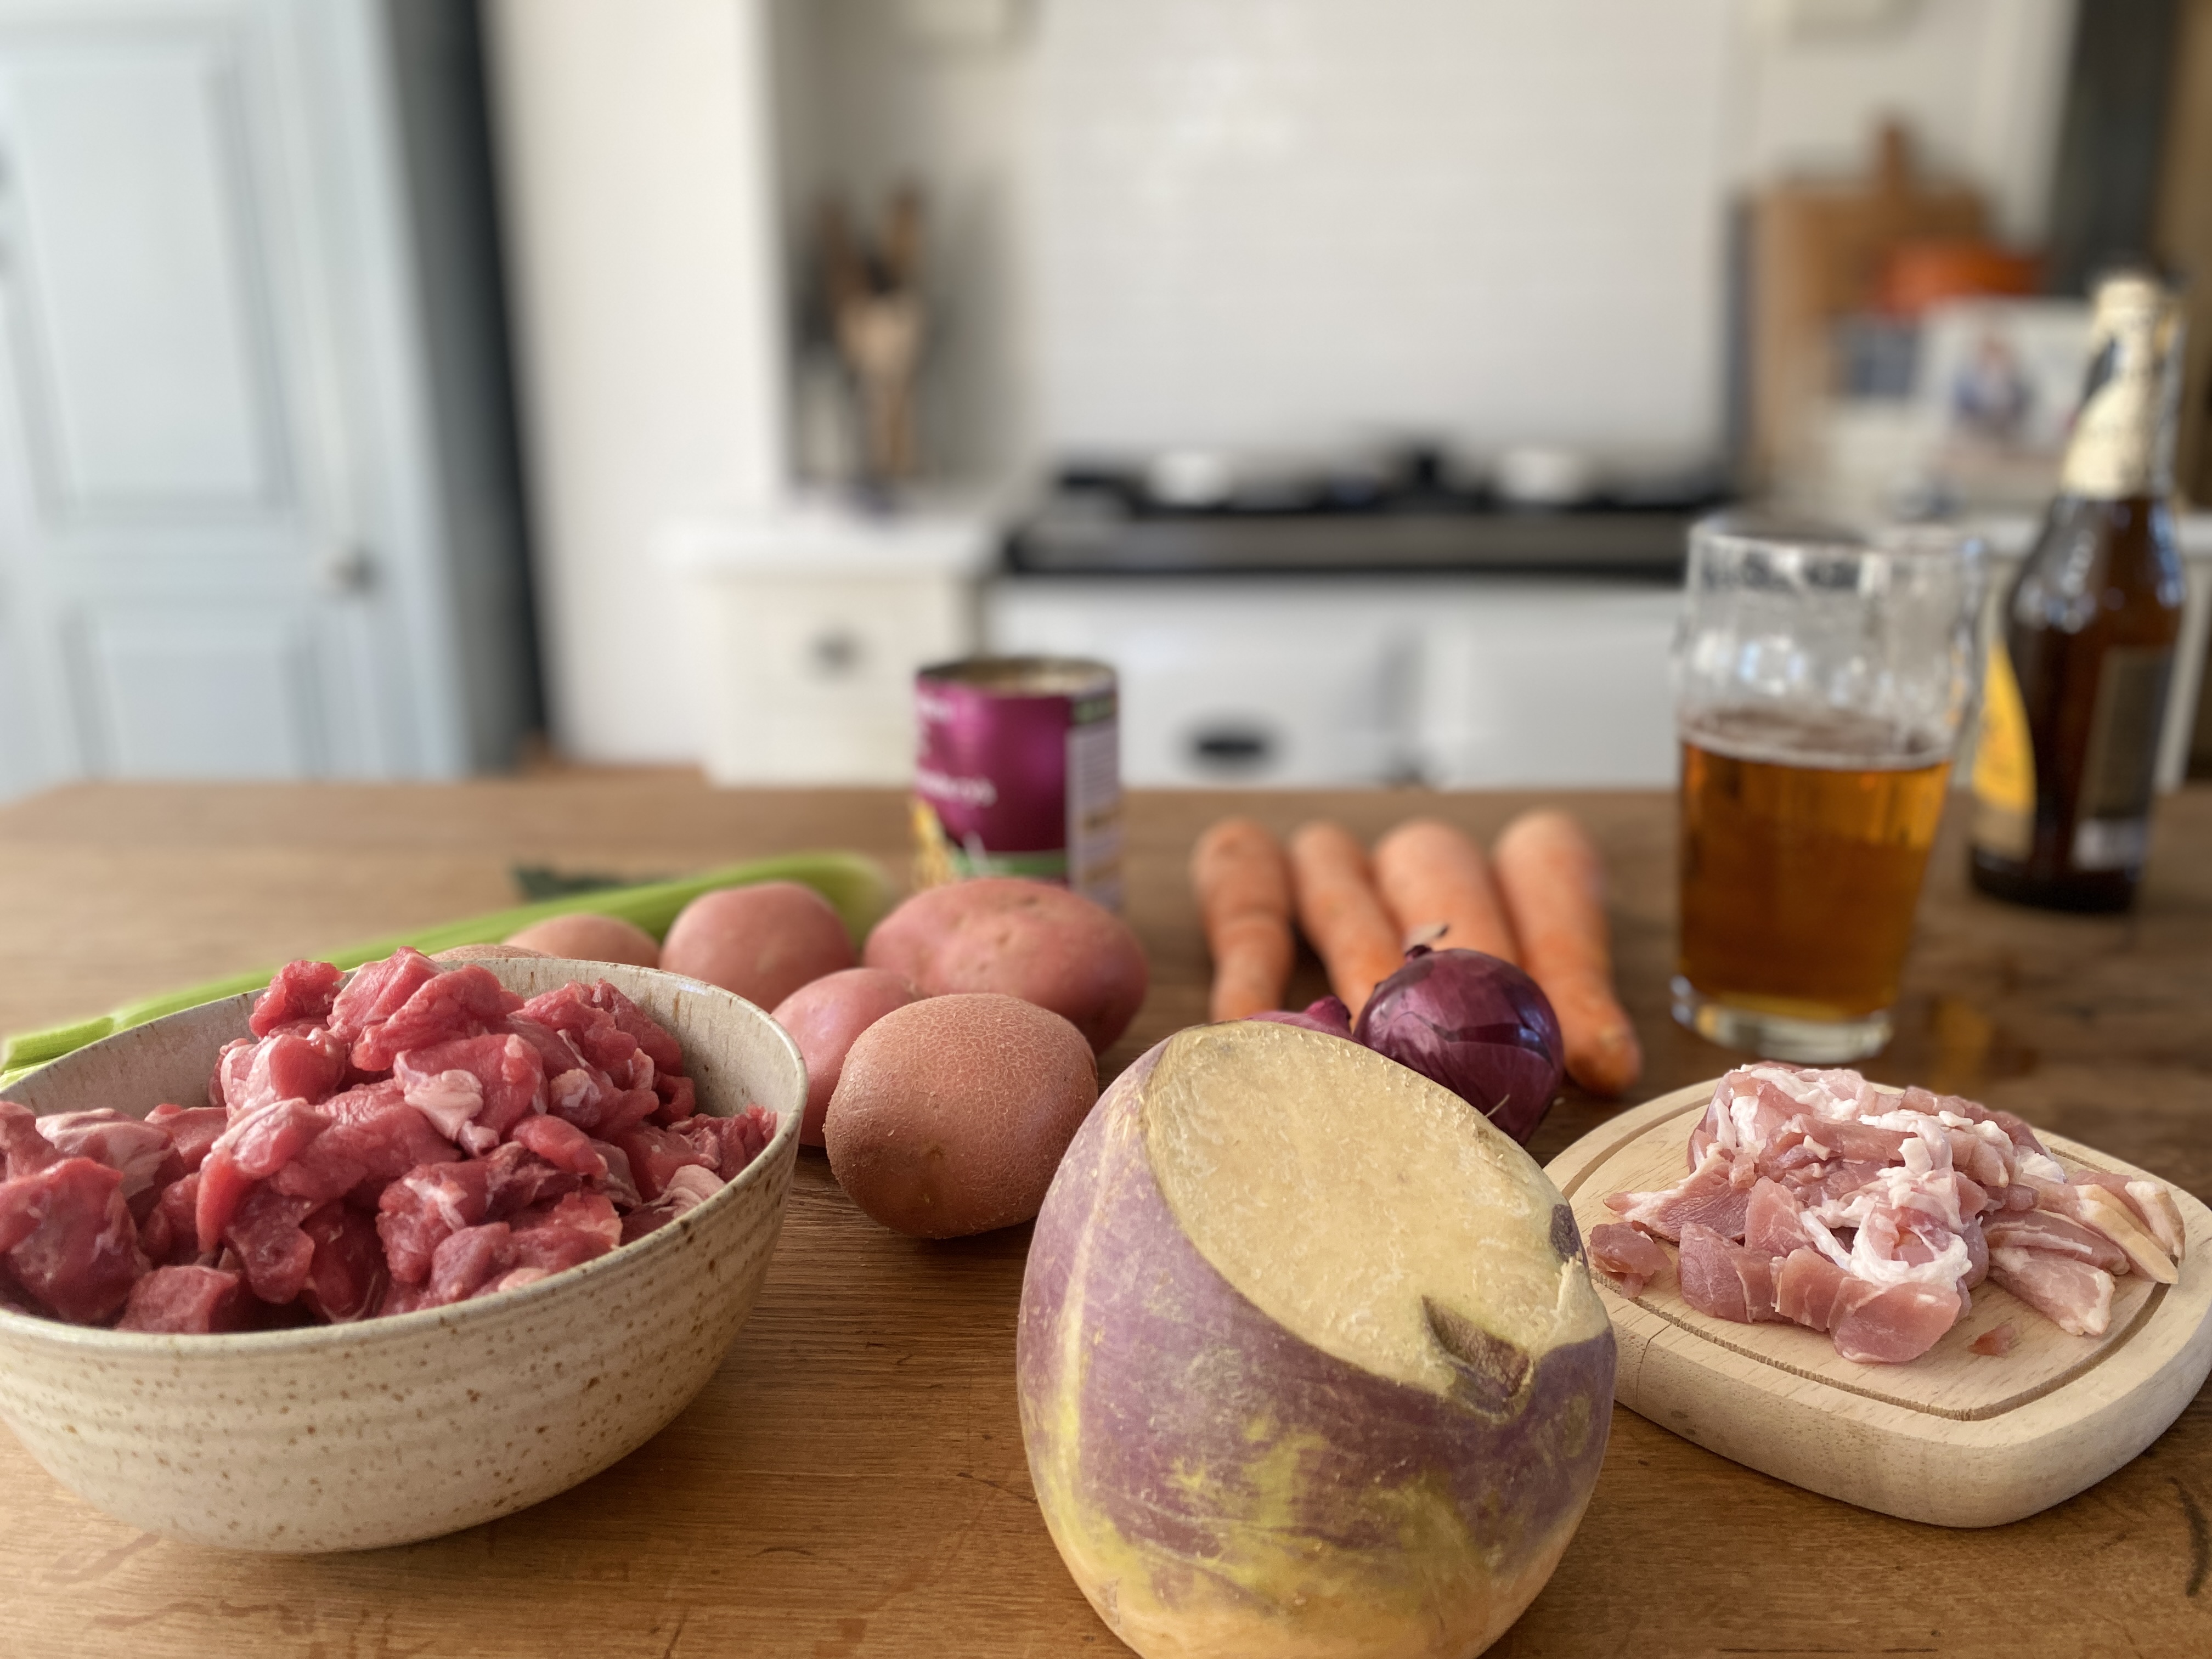 Ingredients for beef stew: beef, swede, carrots, leeks, potatoes, onions, bacon, beans and beer